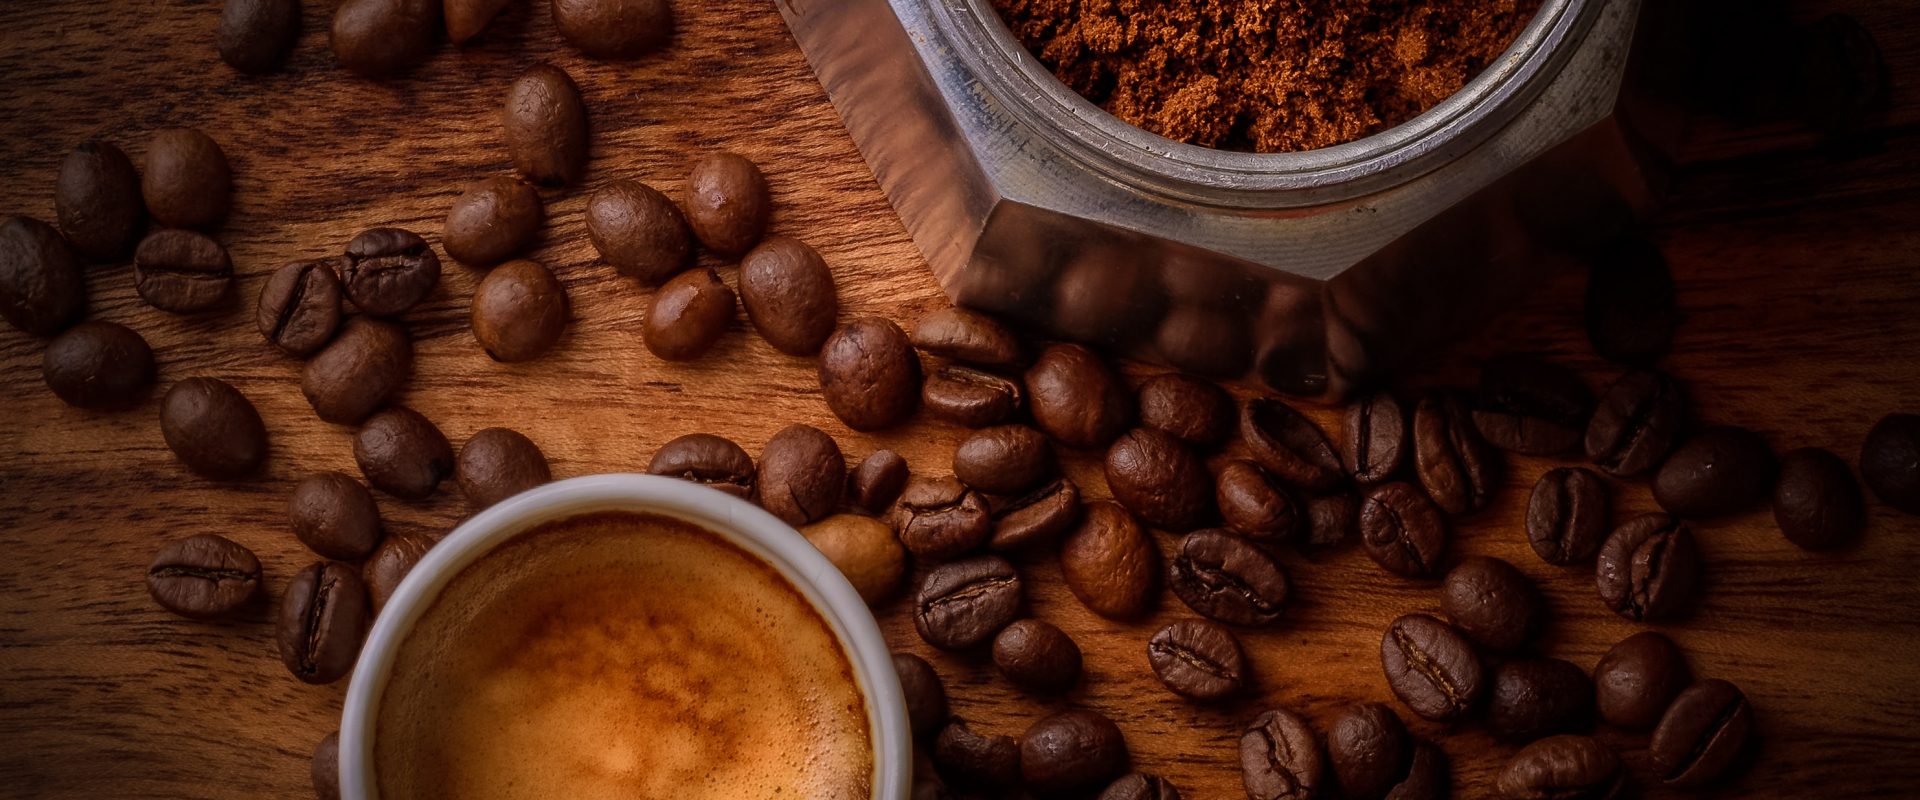 How to use coffee grounds in your garden